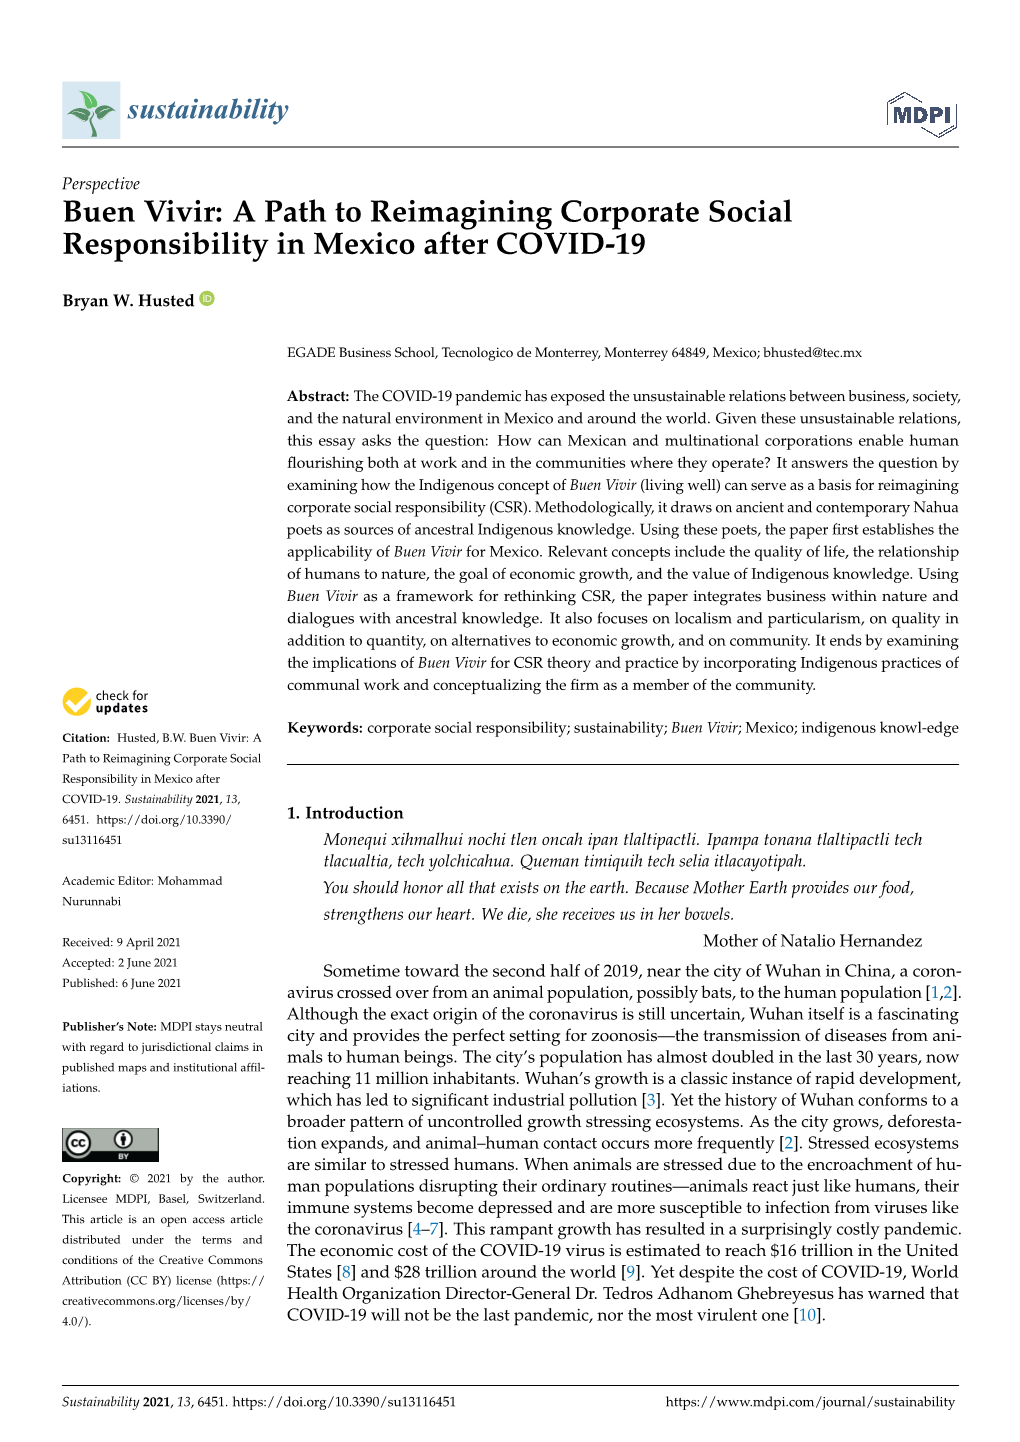 Buen Vivir: a Path to Reimagining Corporate Social Responsibility in Mexico After COVID-19